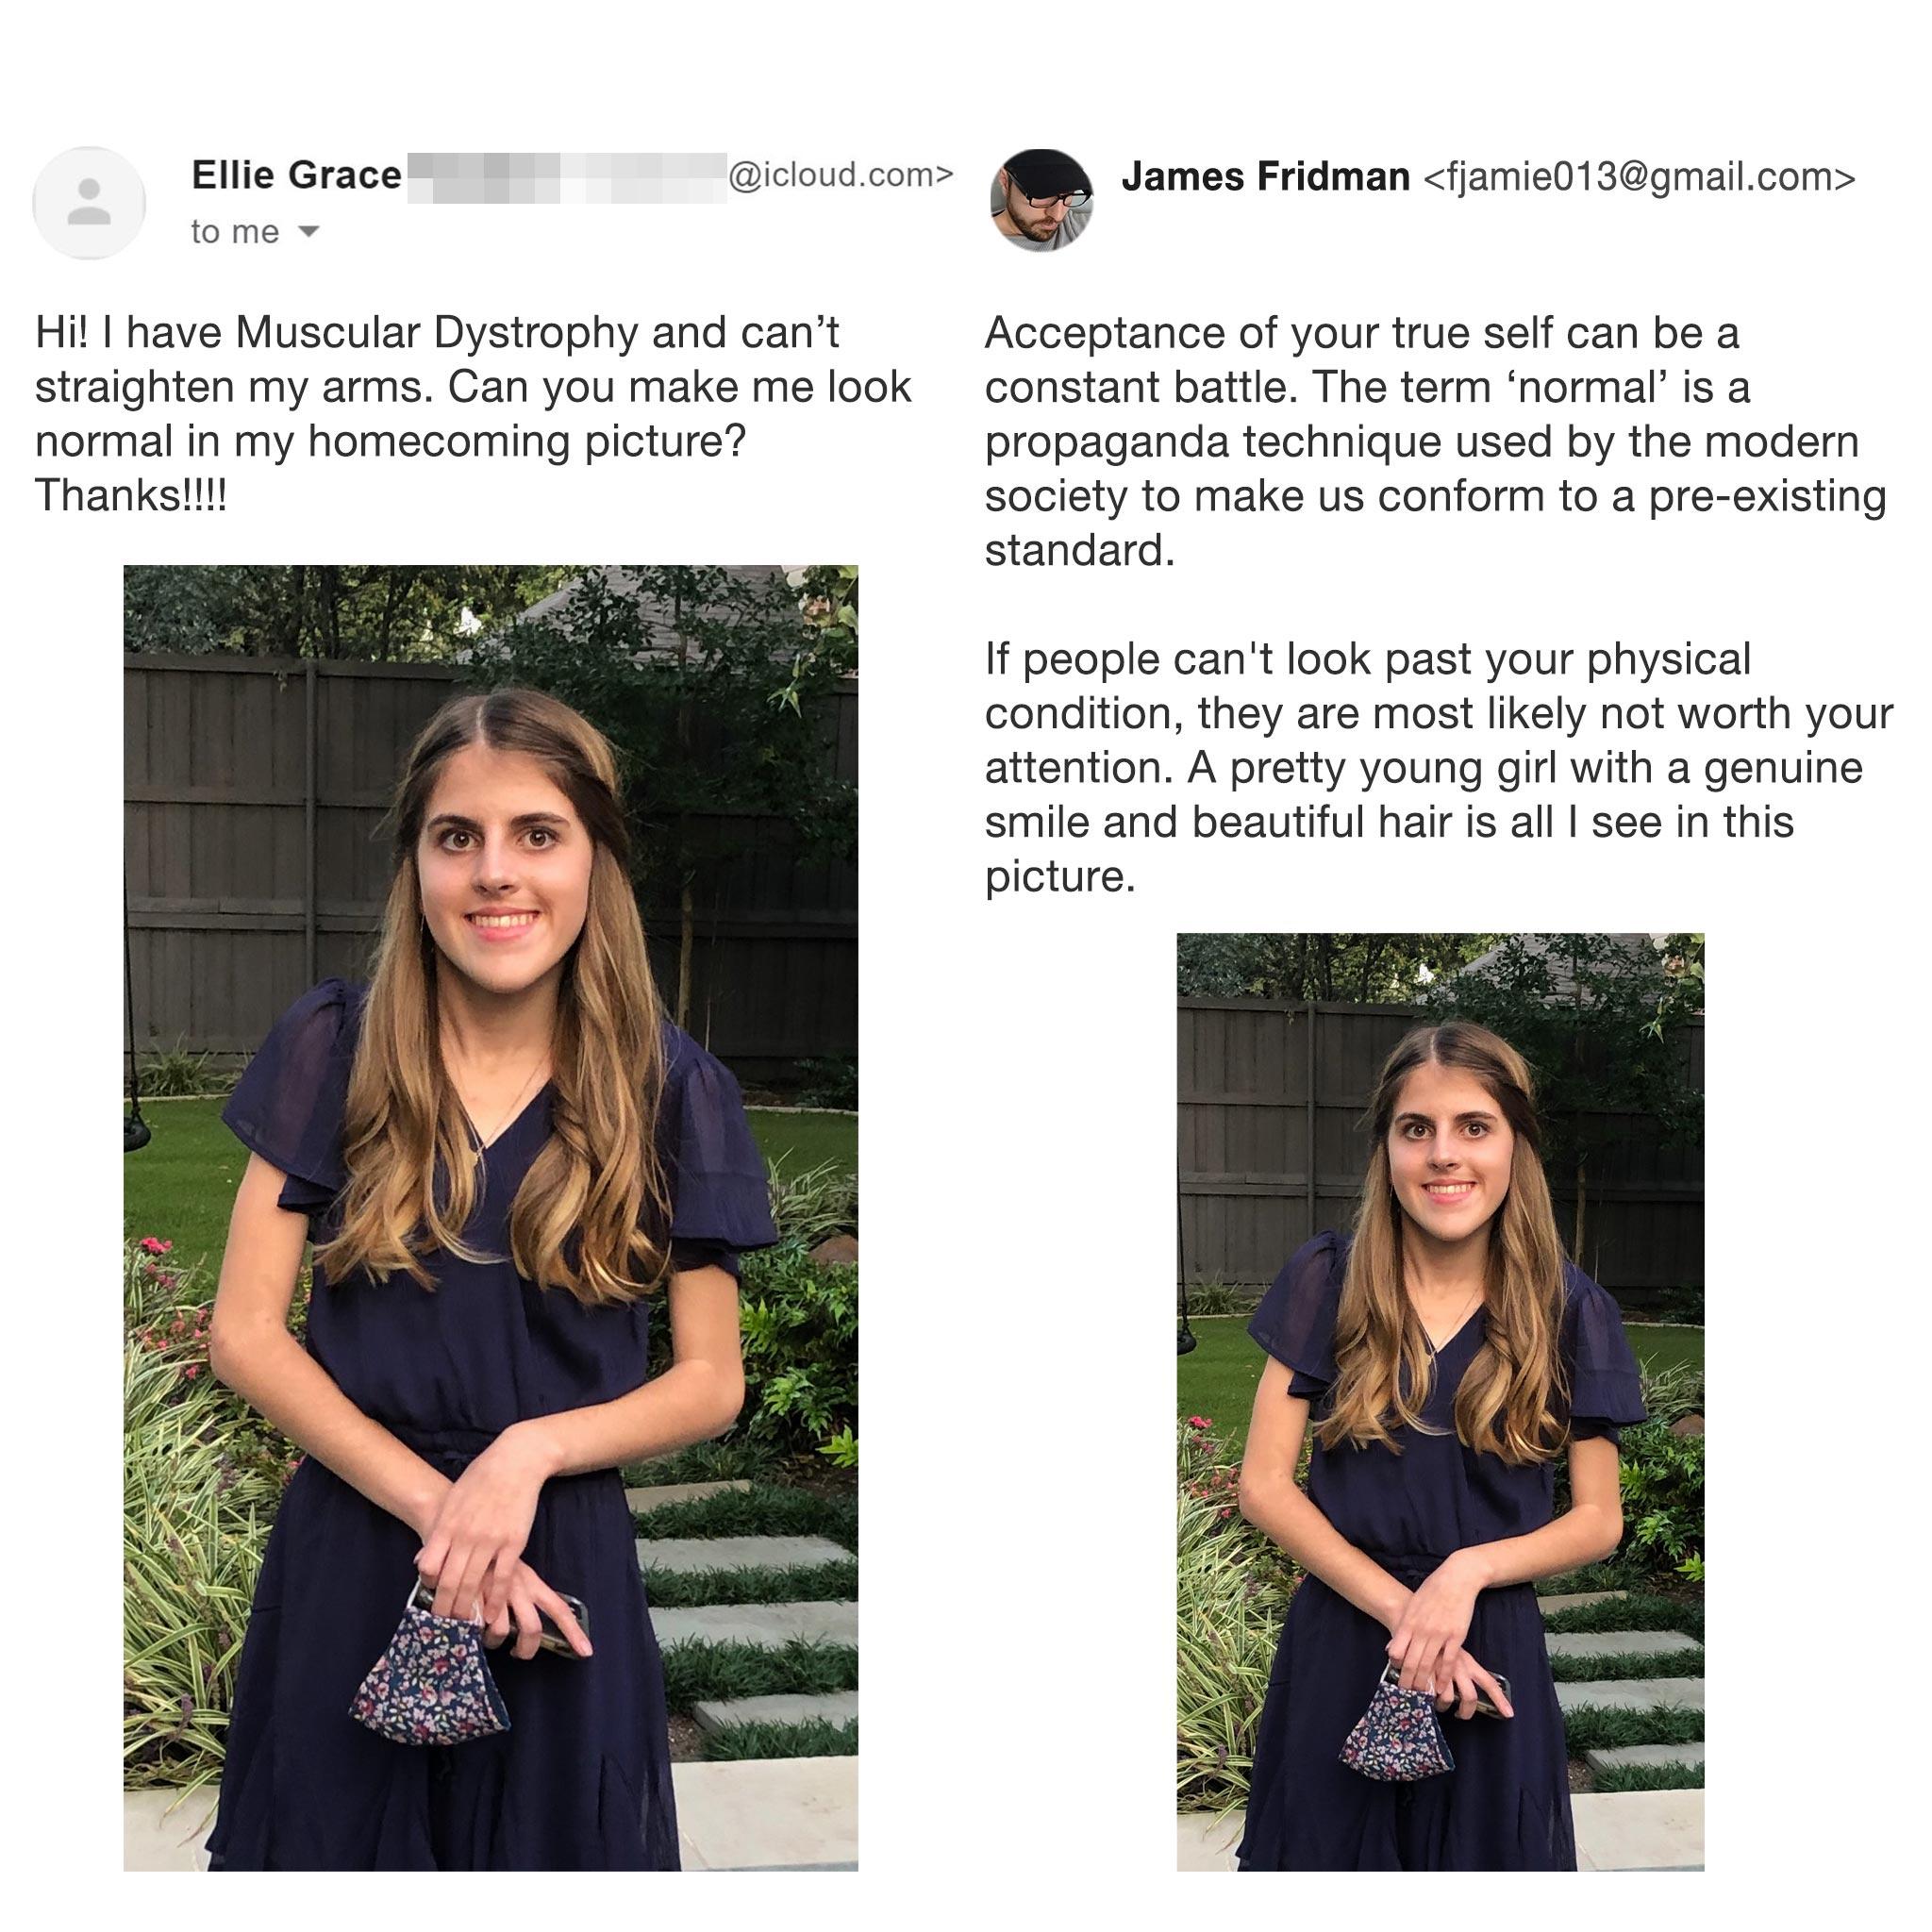 dress - .com Ellie Grace to mo James Fridman  Hi! I have Muscular Dystrophy and can't straighten my arms. Can you make me look normal in my homecoming picture? Thanks!!!! Acceptance of your true self can be a constant battle. The term 'normal' is a…